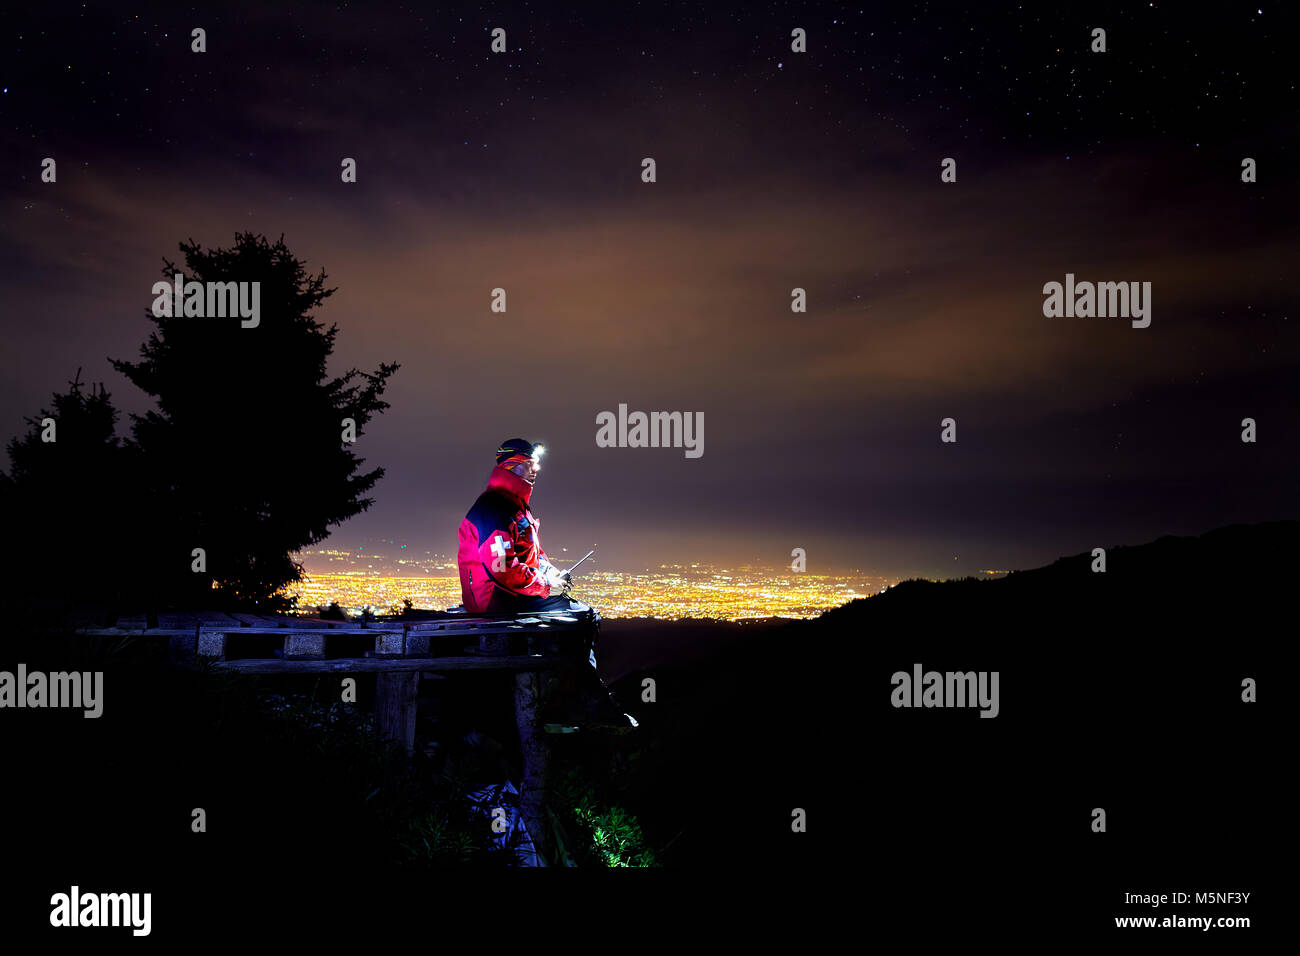 Lifeguard in red jacket with medical cross siting on the wooden branch in the mountain ski resort with view to night city light Stock Photo